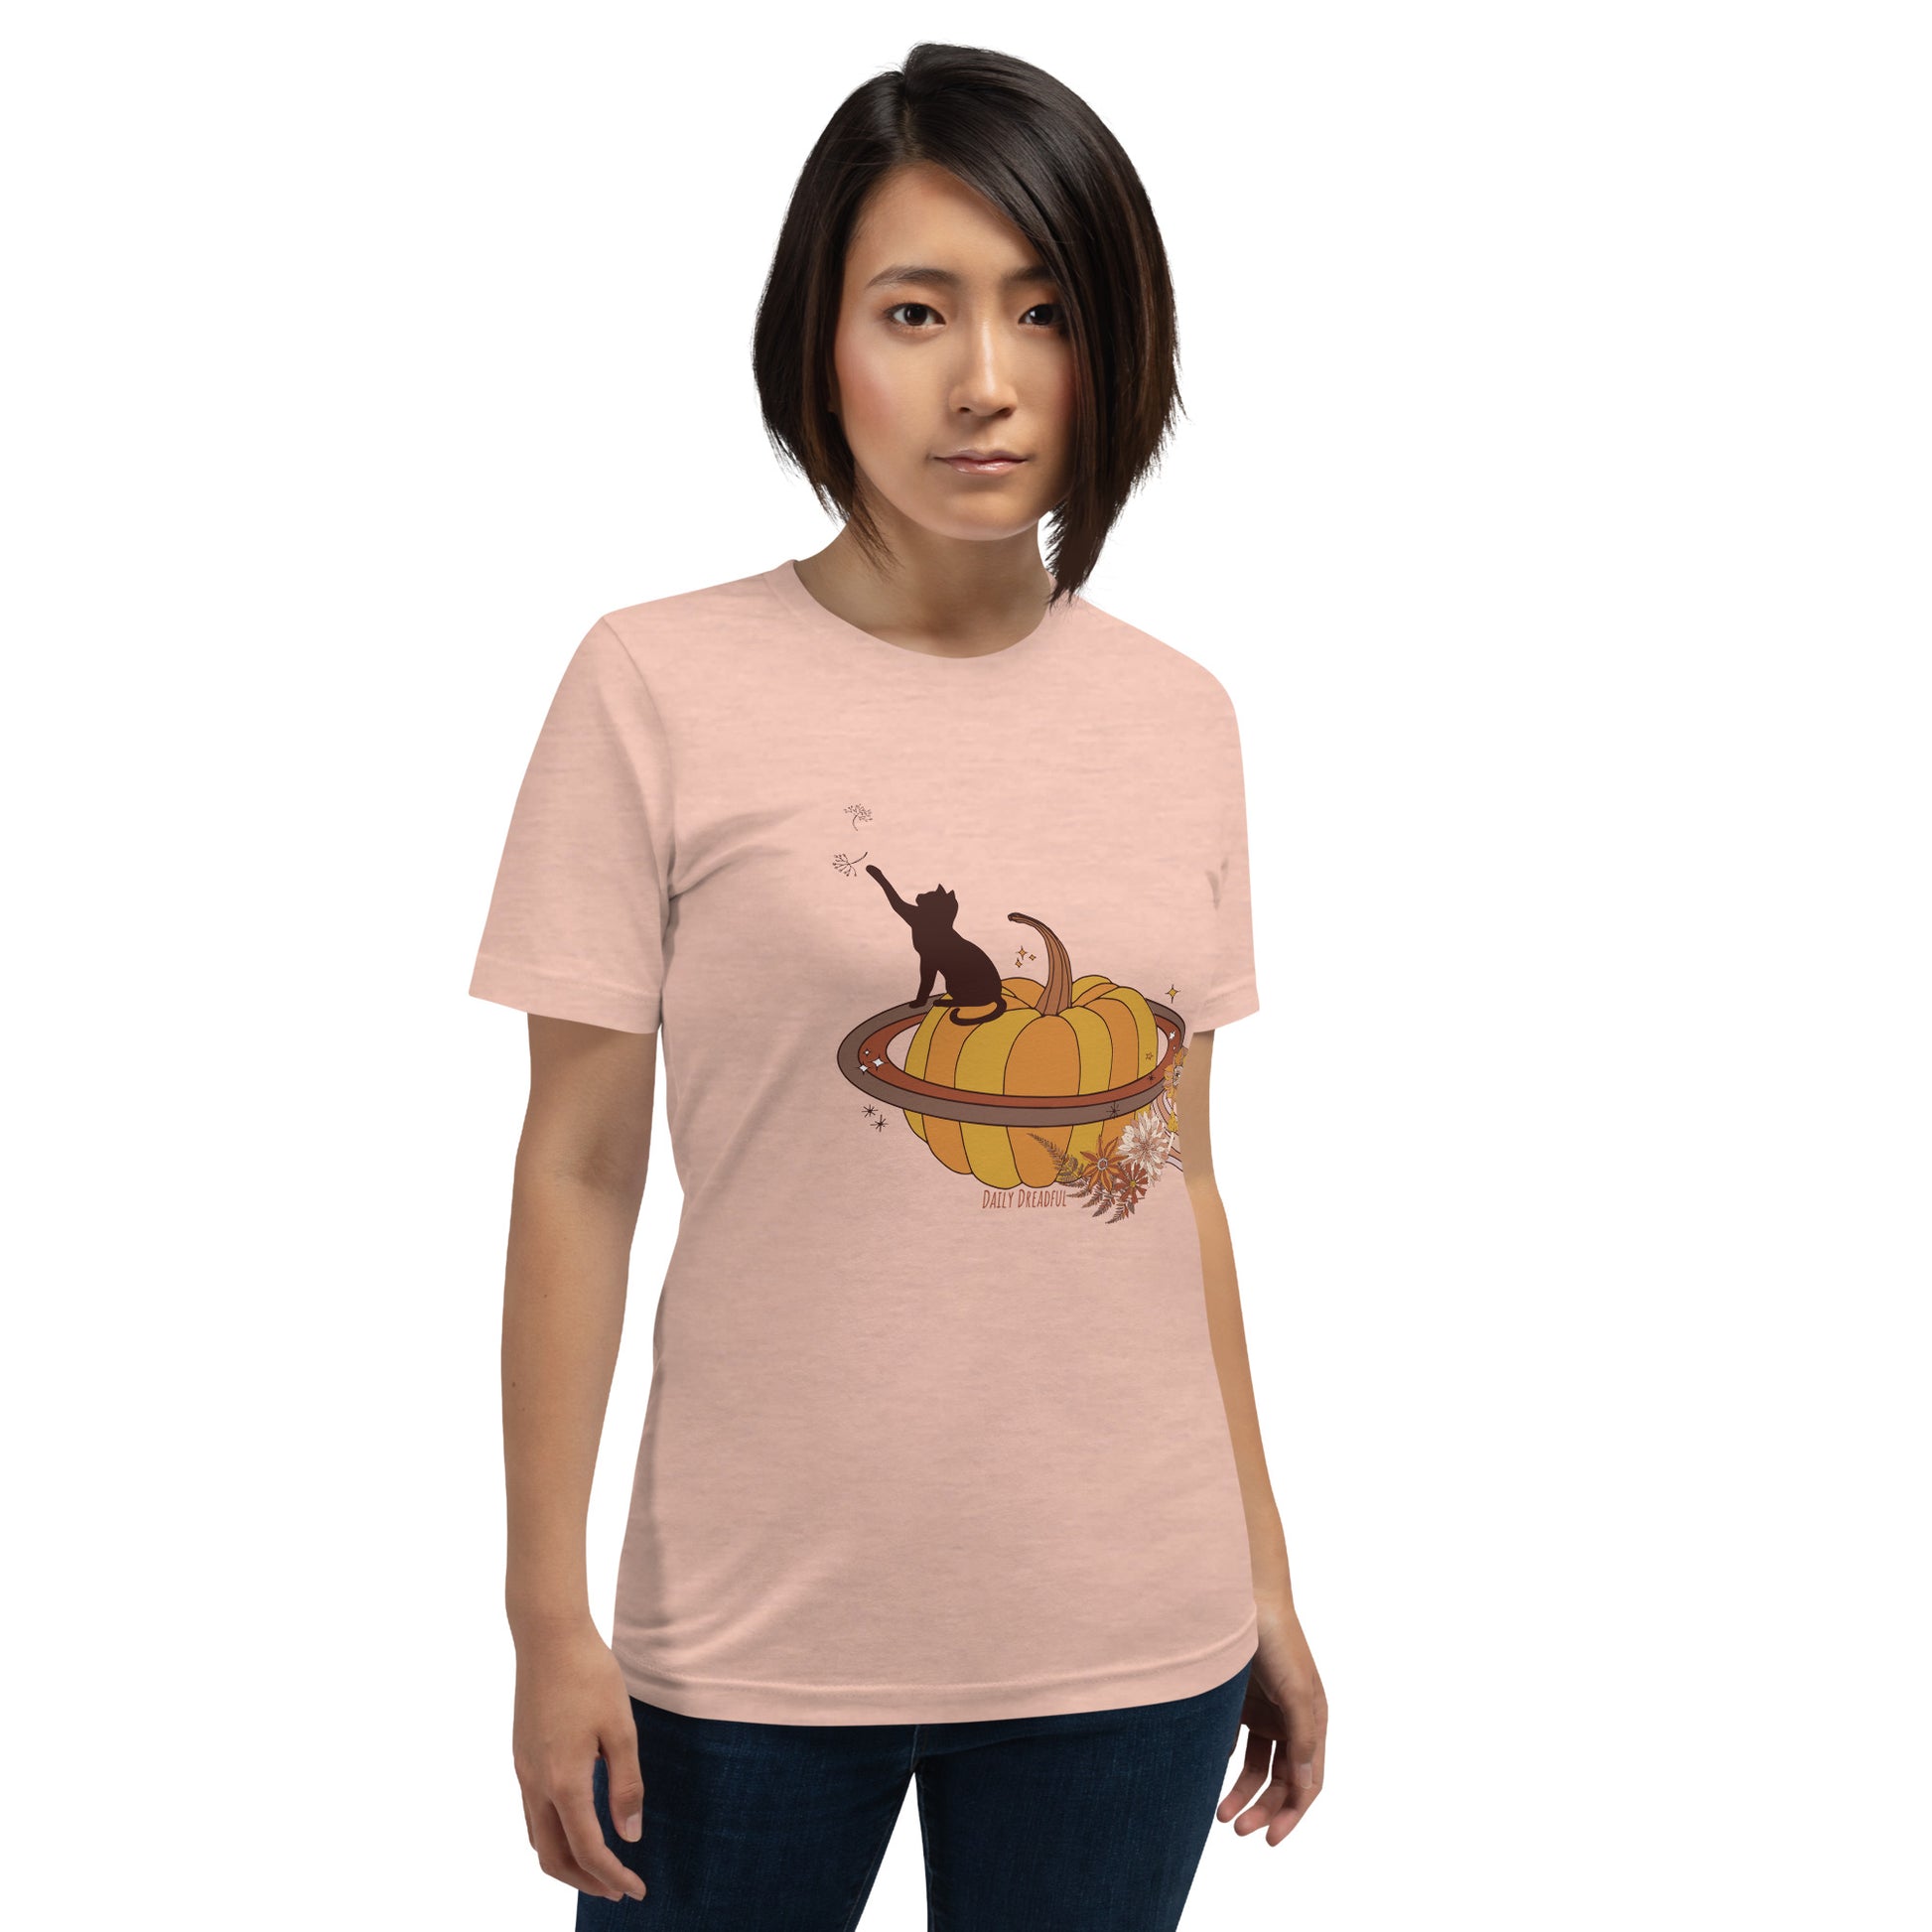 heather prism peach "spooky fall kitty" t-shirt for women from Daily Dreadful